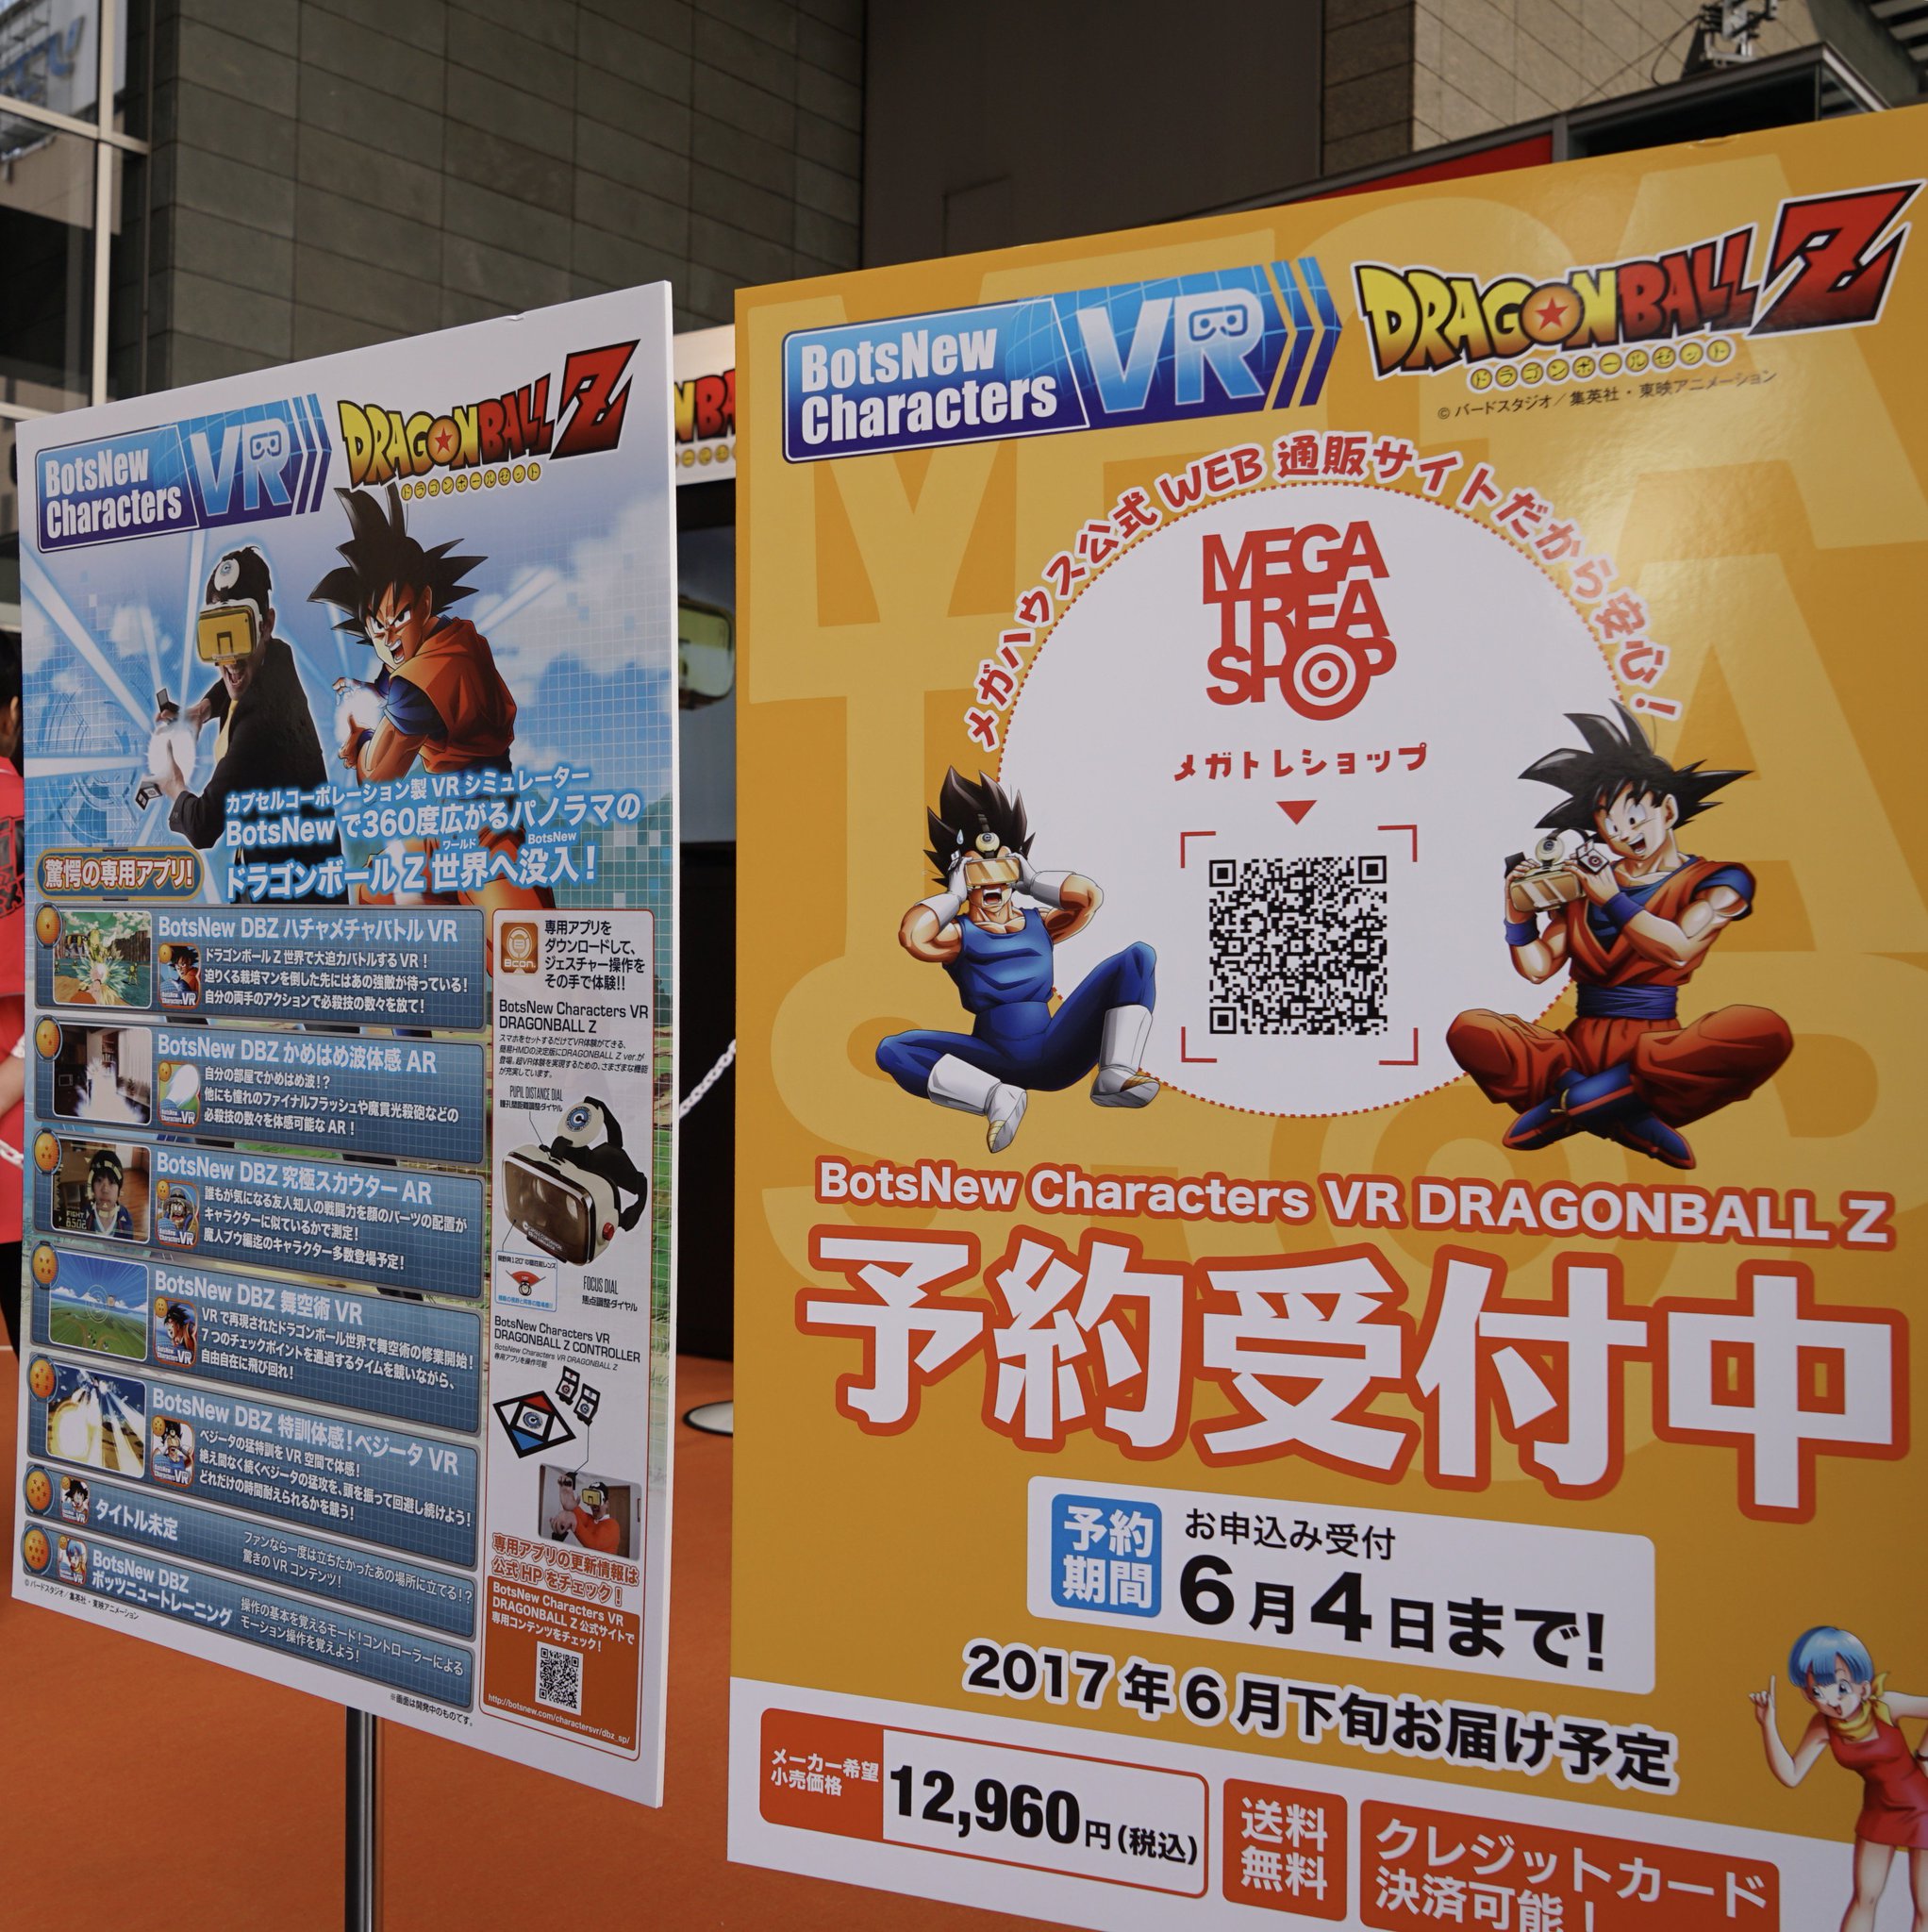 Megahouse Check Out The Botsnew Characters Vr Dragonball Z At Megahobby Expo メガホビexpo